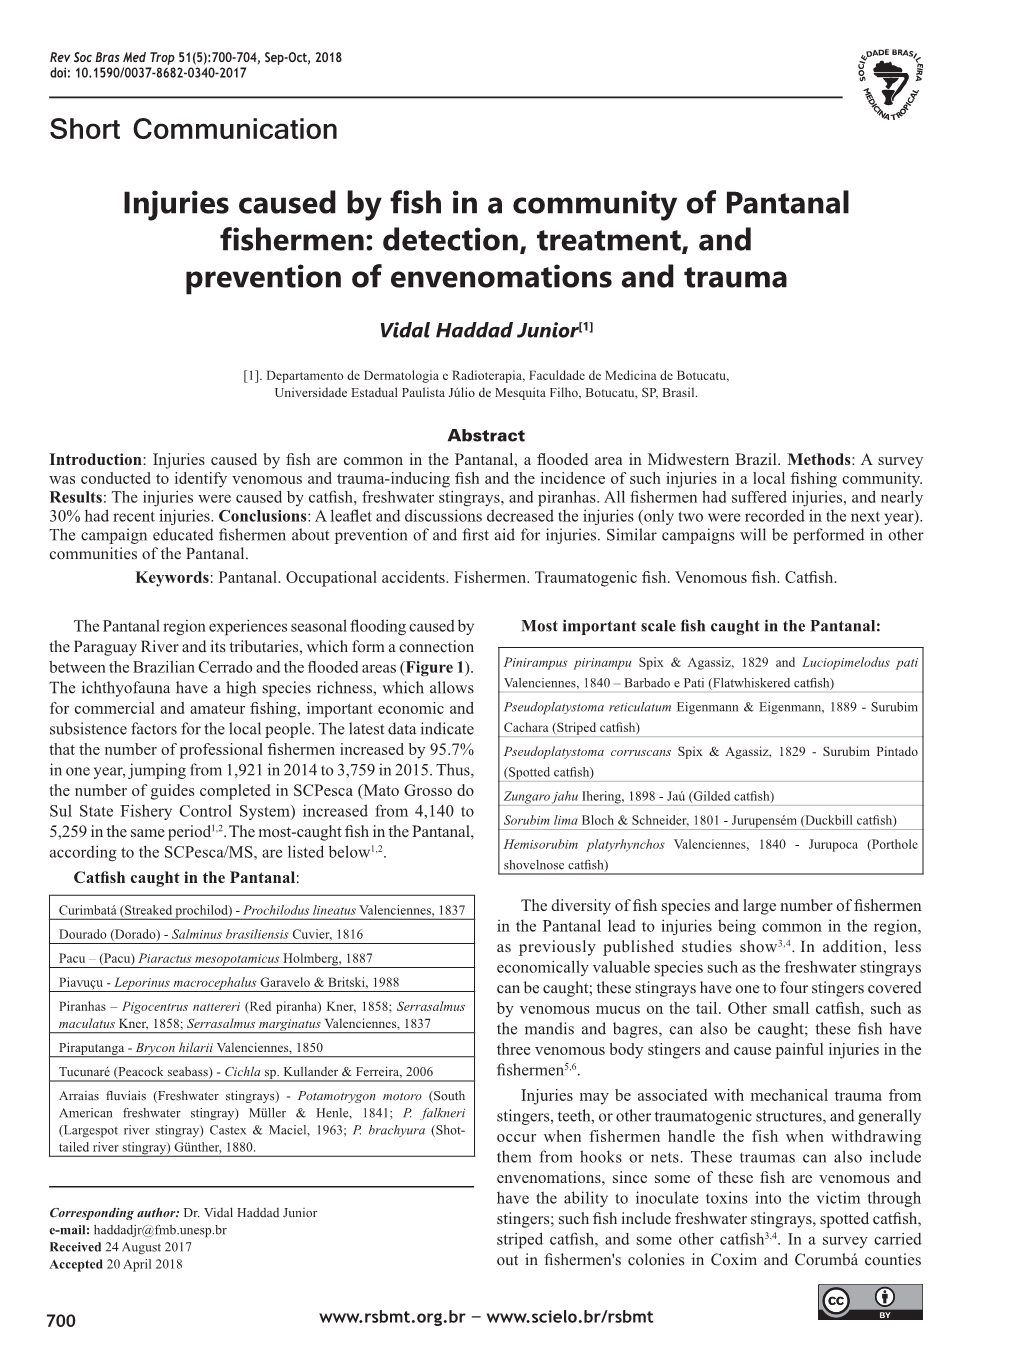 Short Communication Injuries Caused by Fish in a Community of Pantanal